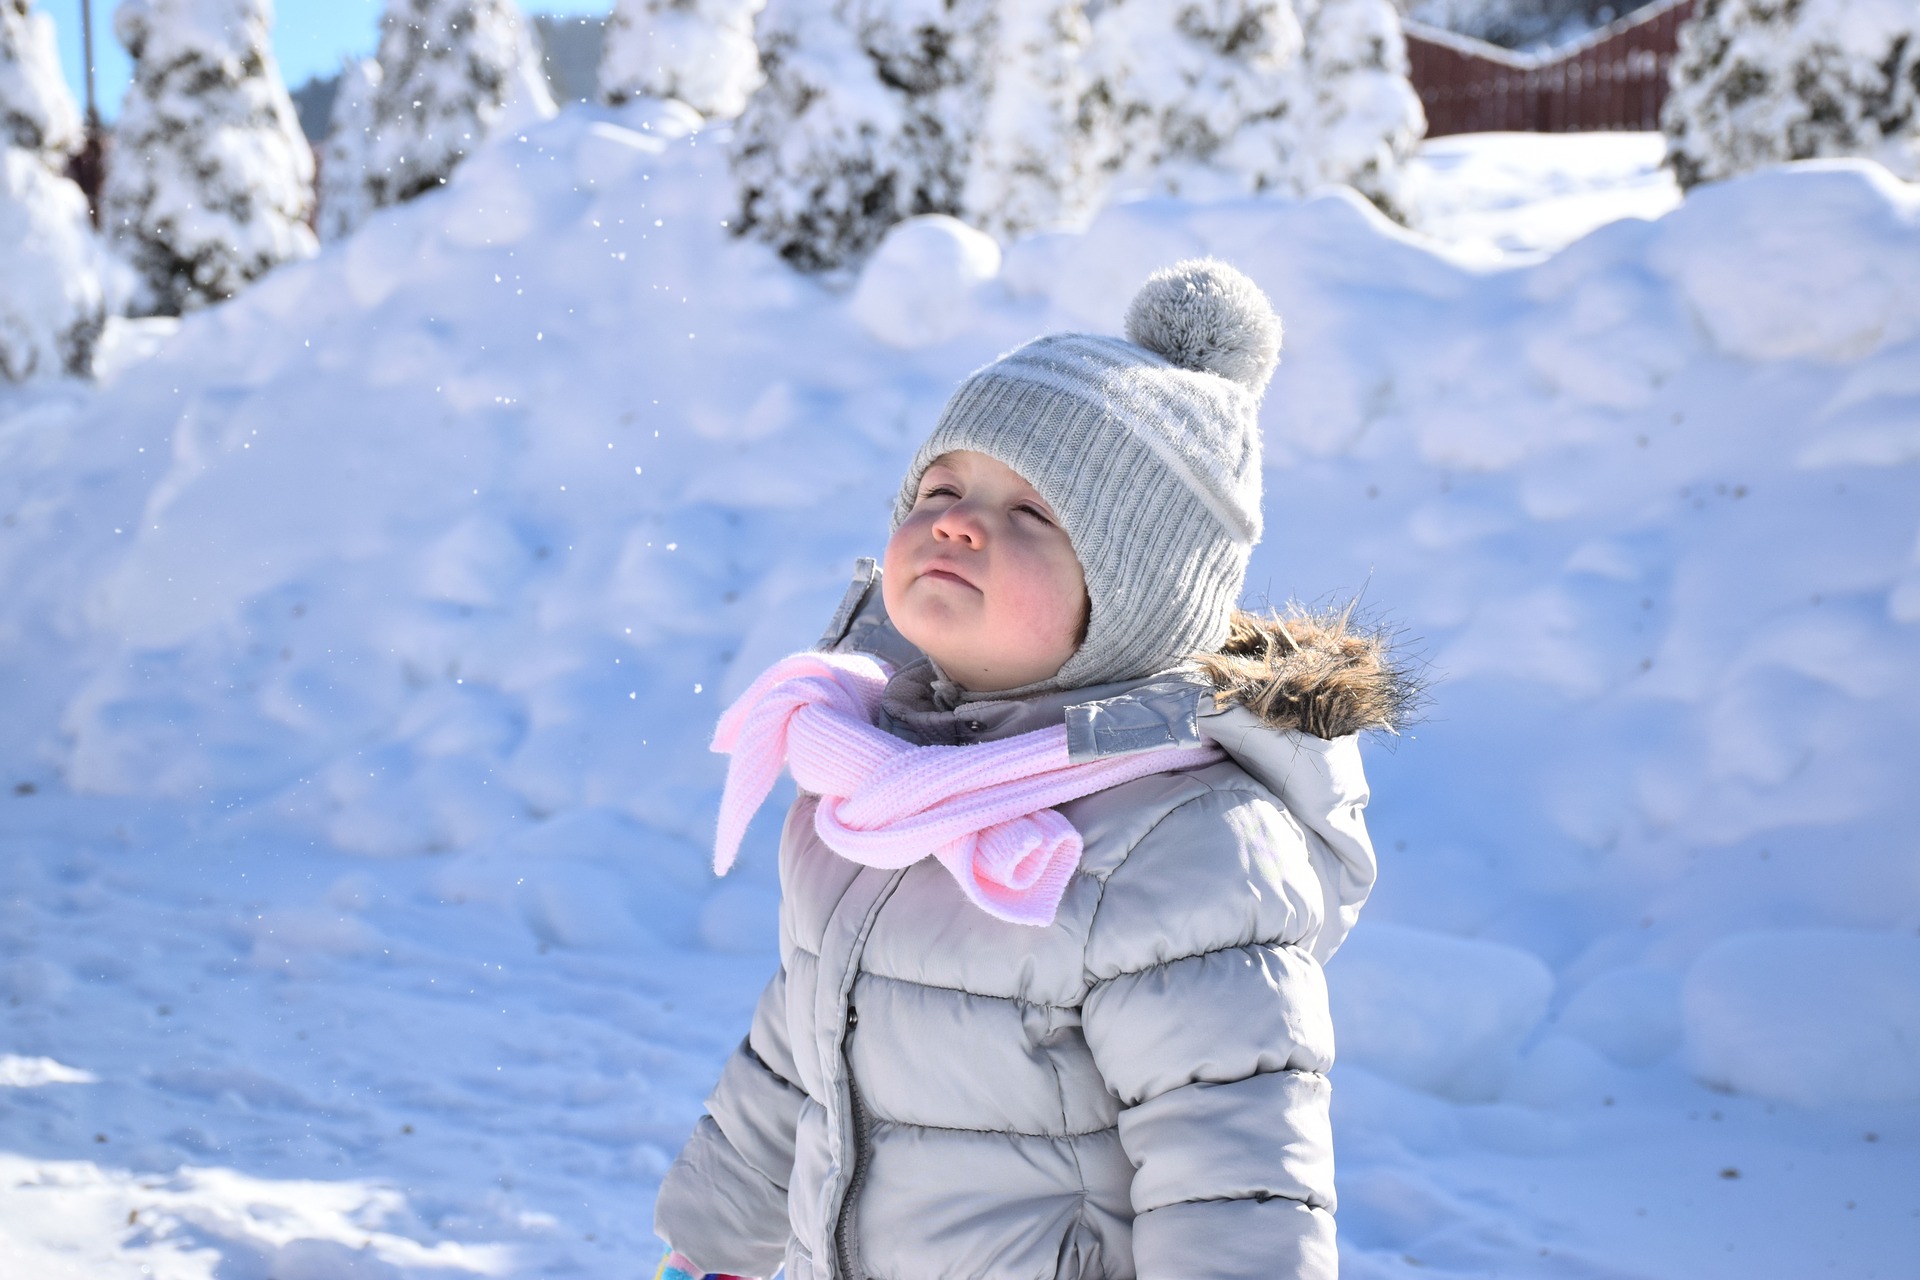 How To Prevent Dry Skin In Children, This Winter- Mom Tips